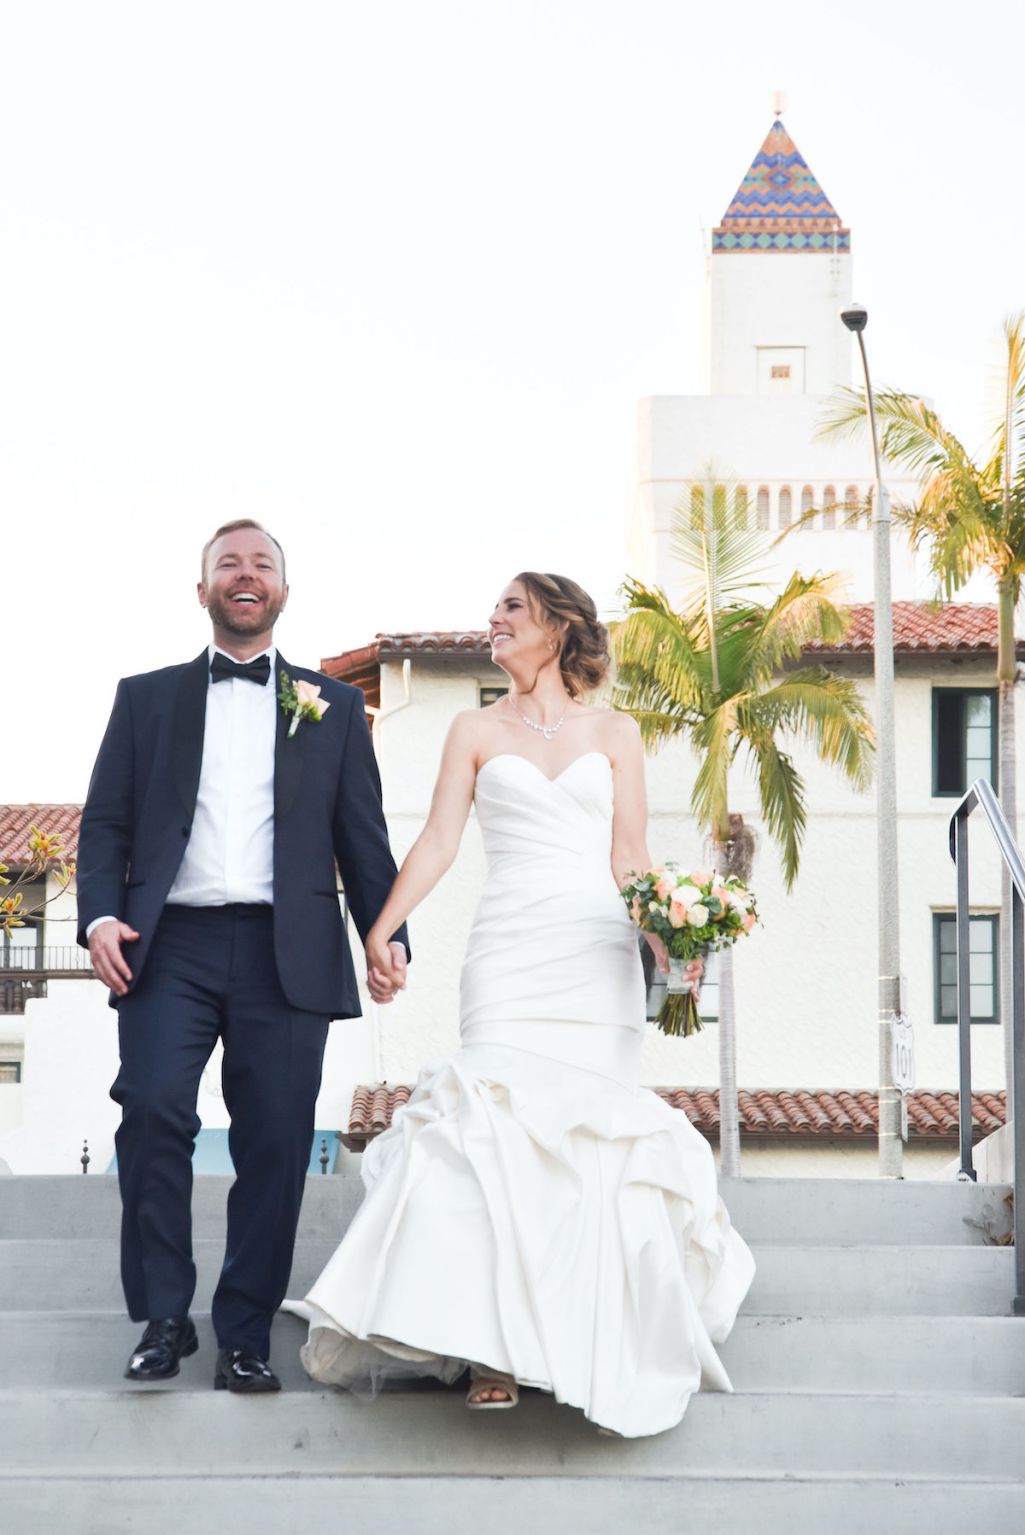 Venue Colin And Alyson Celebrate Their Day At The Cabrillo Pavilion. Carly Otness Photography ?w=1025